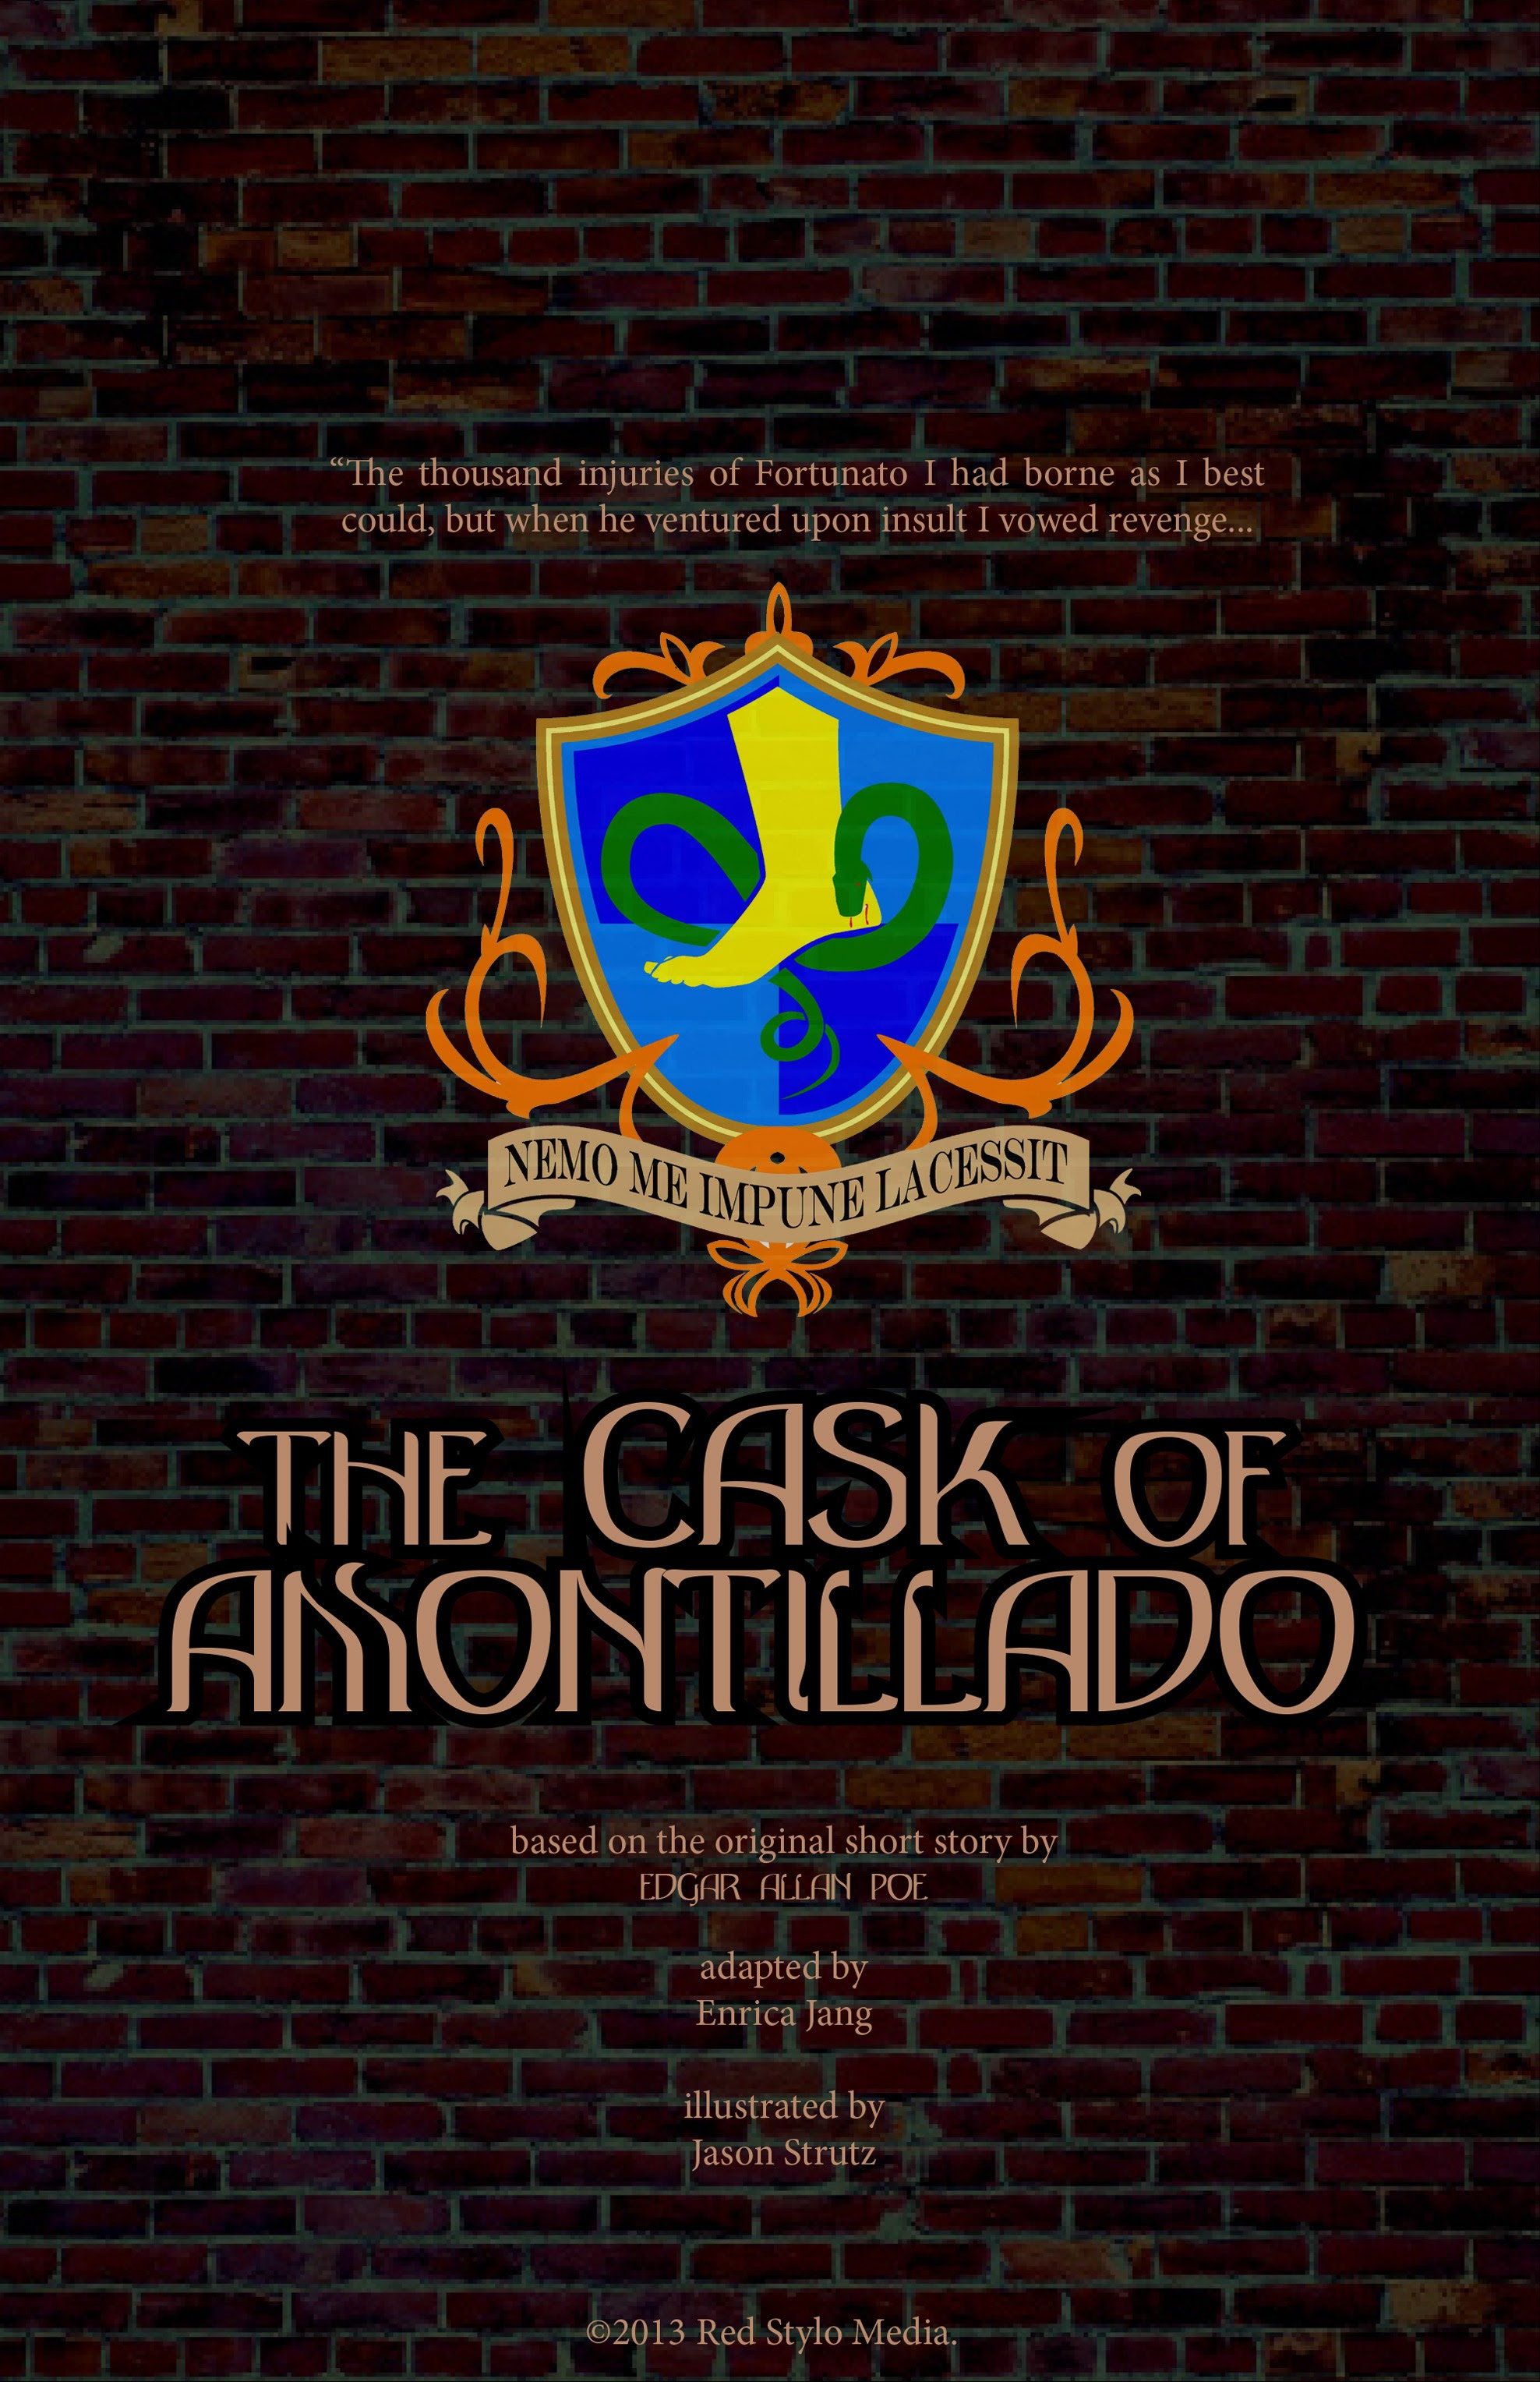 Read online The Cask of Amontillado comic -  Issue # Full - 2